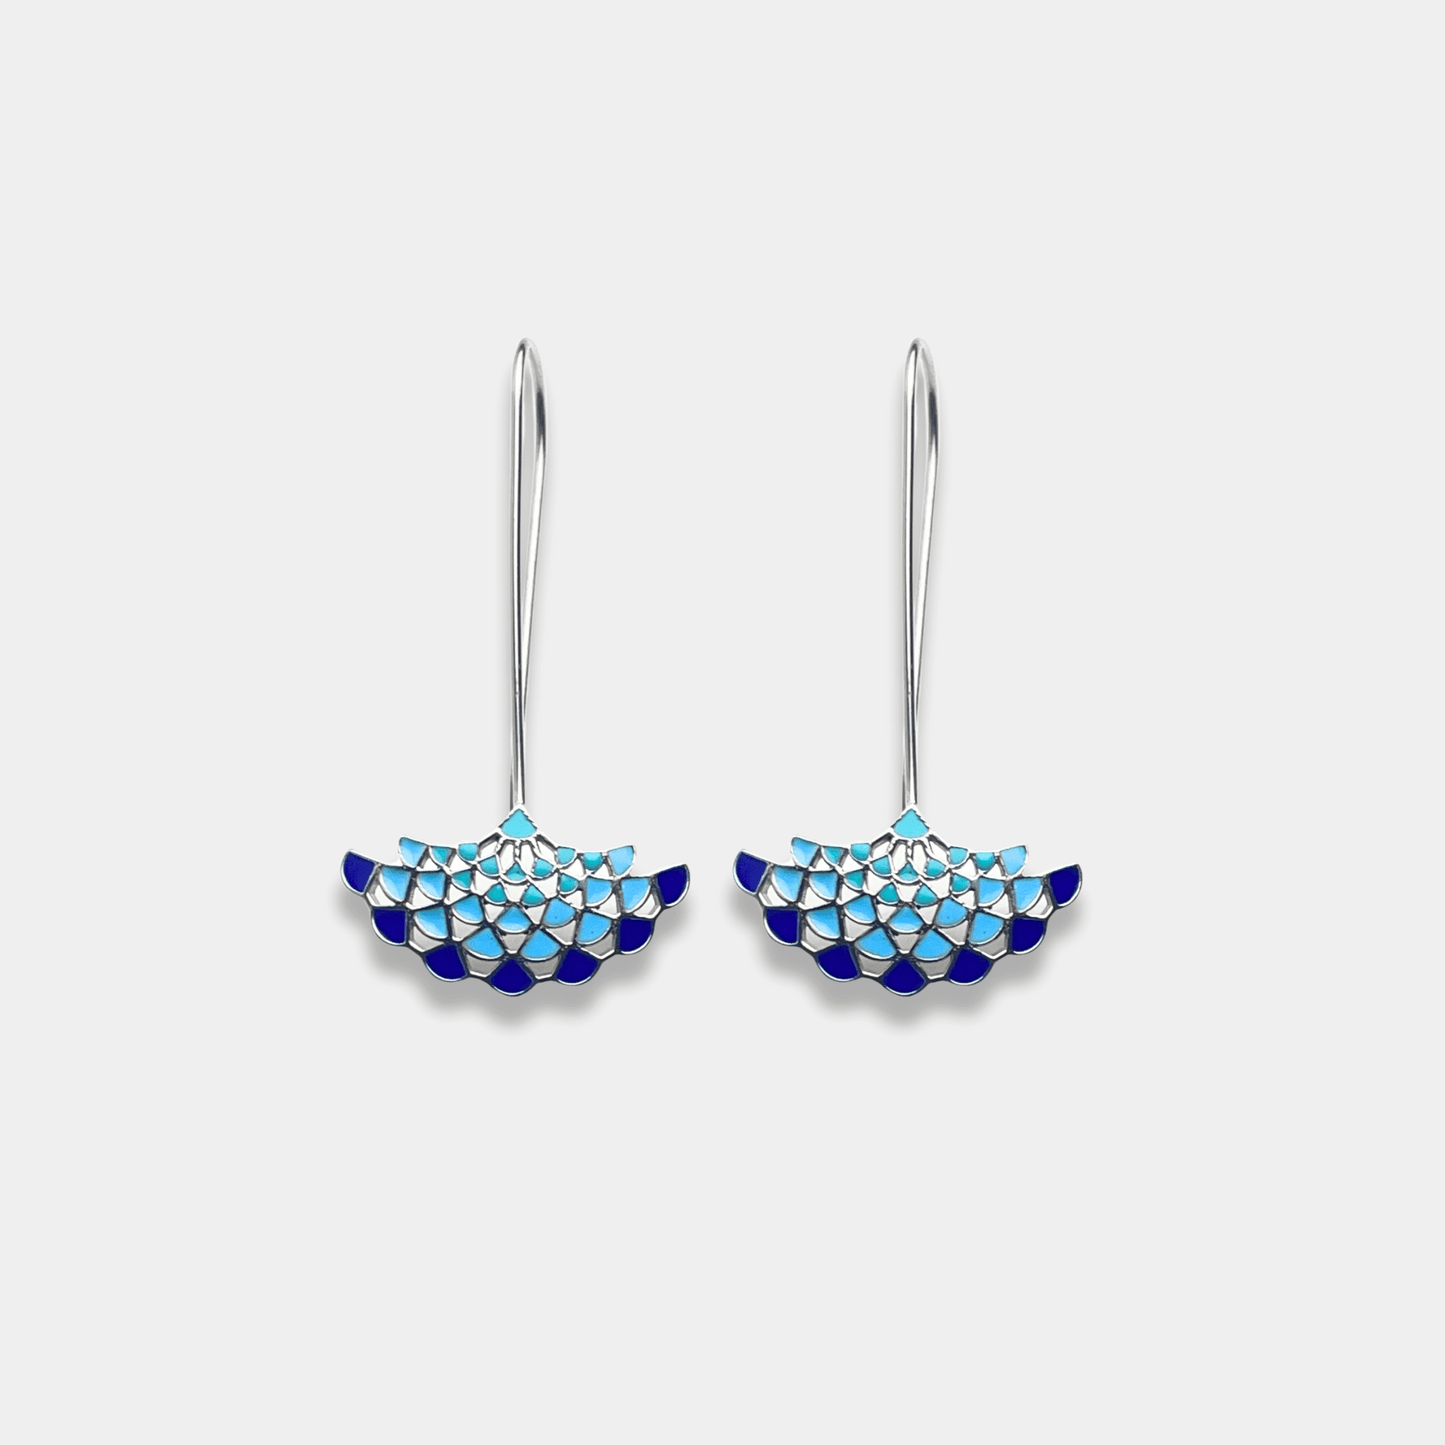 A stunning pair of sterling silver earrings 